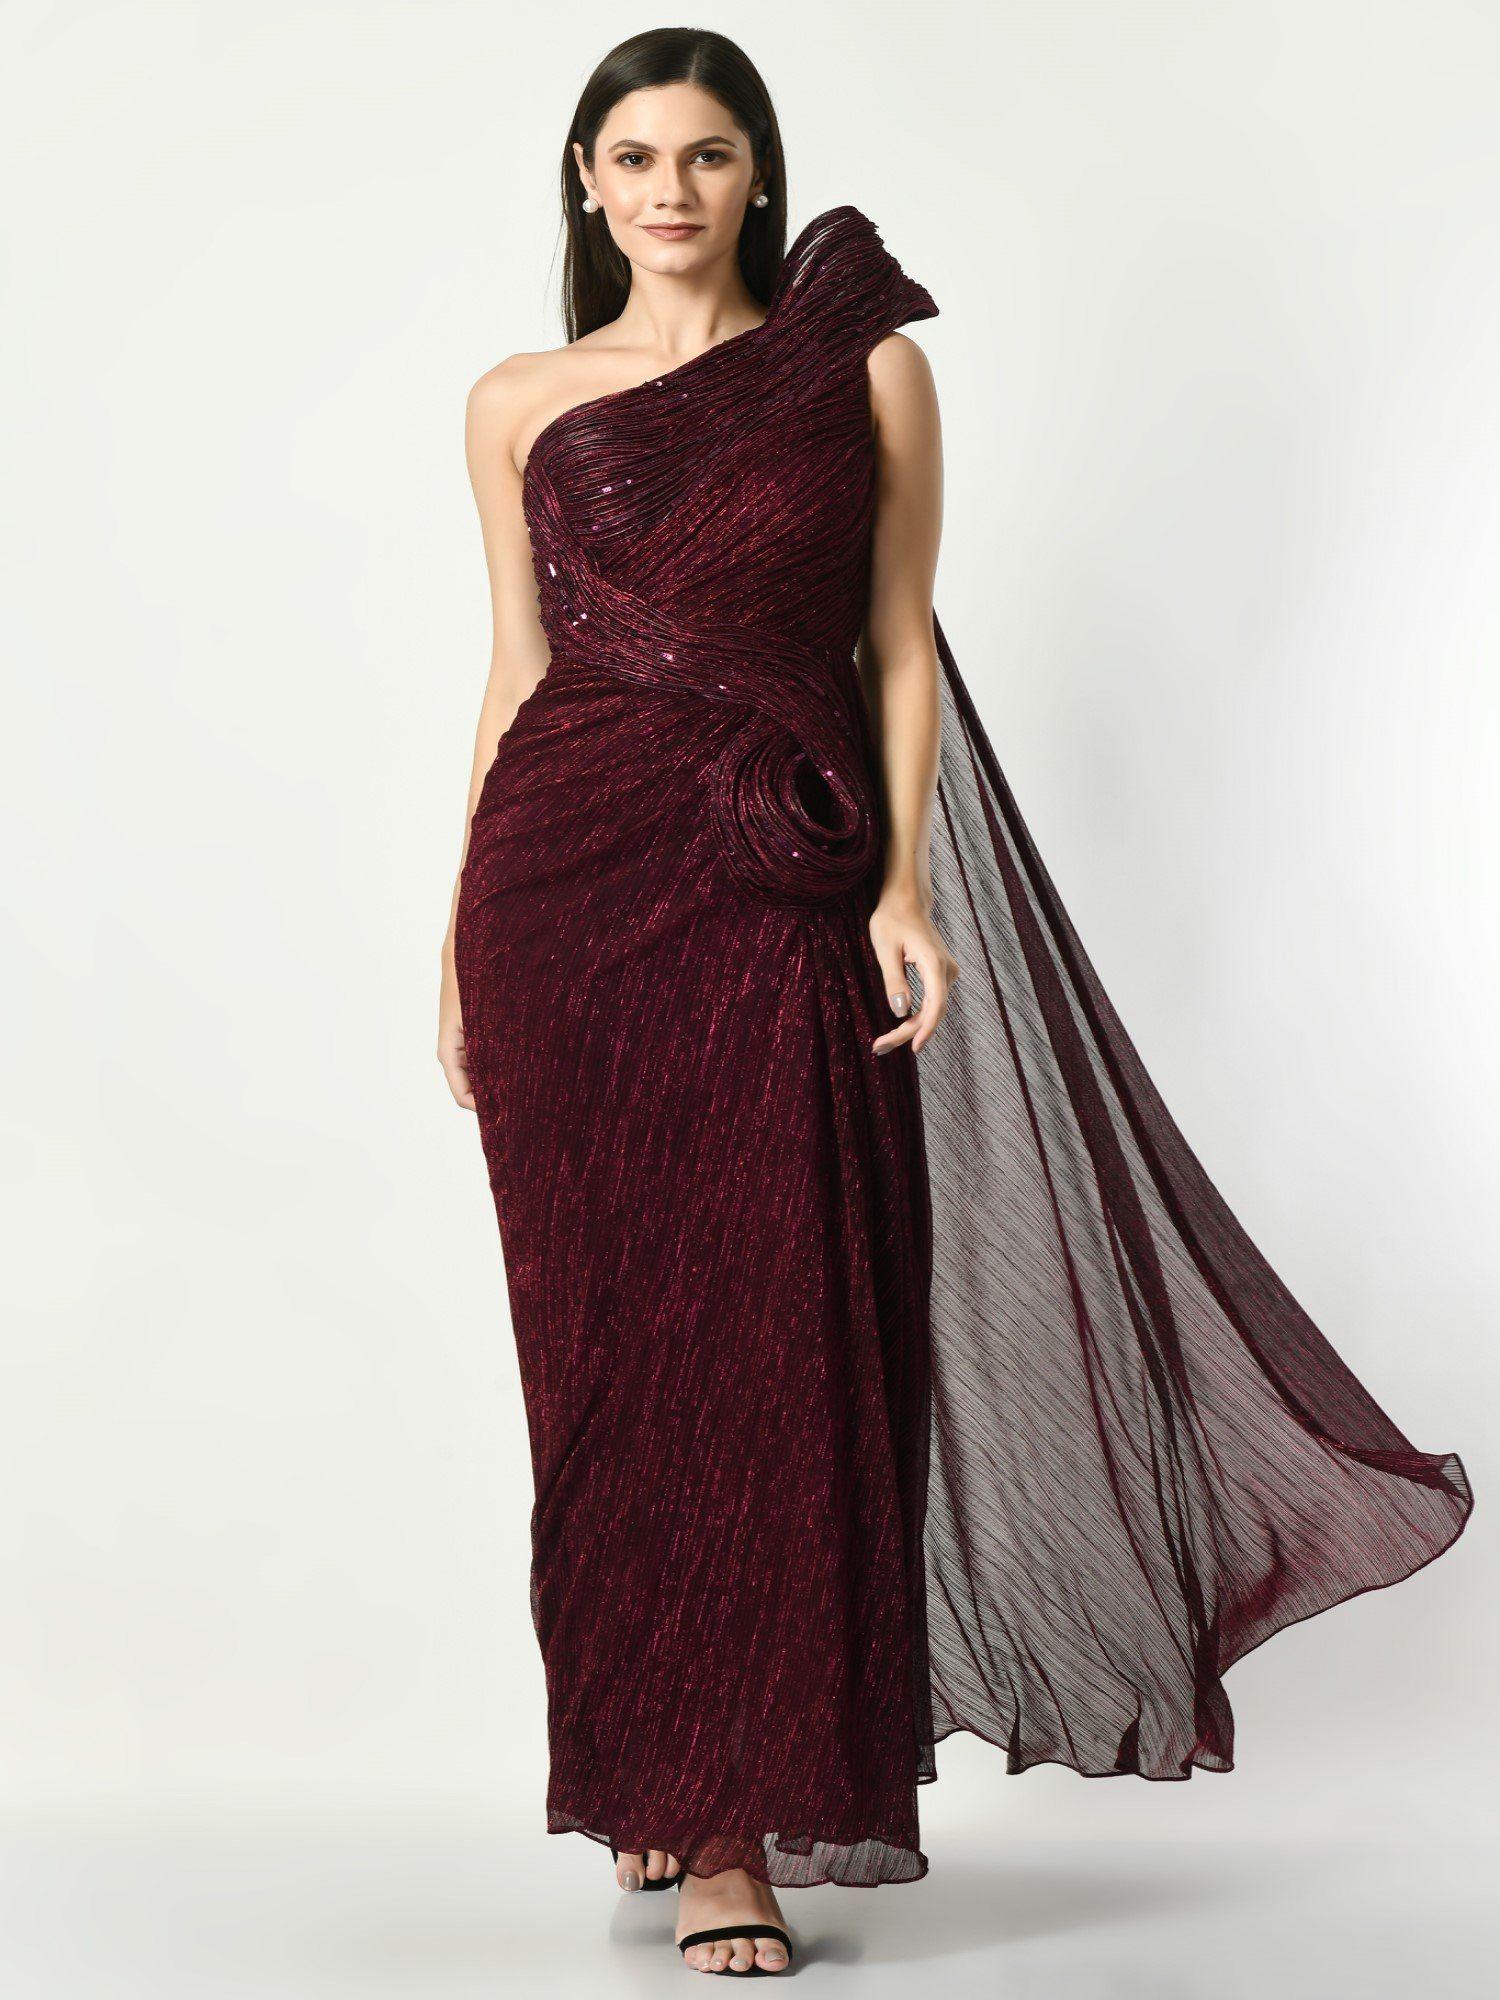 whispering wonders - wine draped gown with sequin